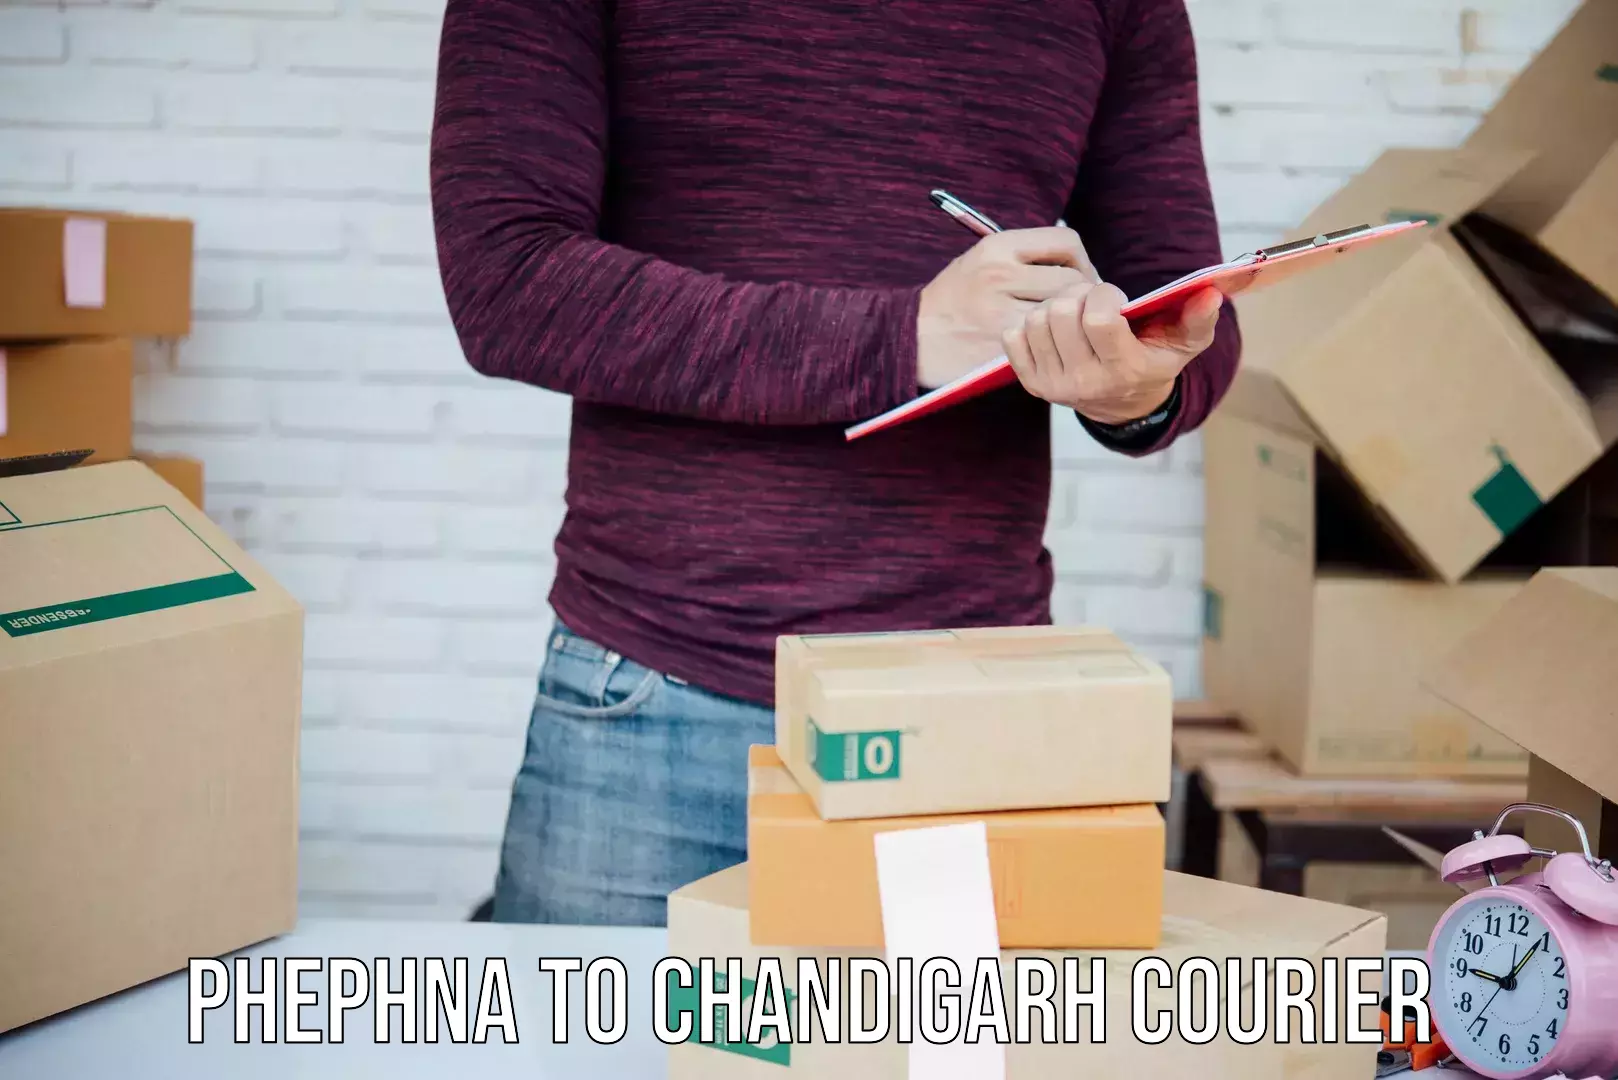 Efficient shipping operations Phephna to Chandigarh